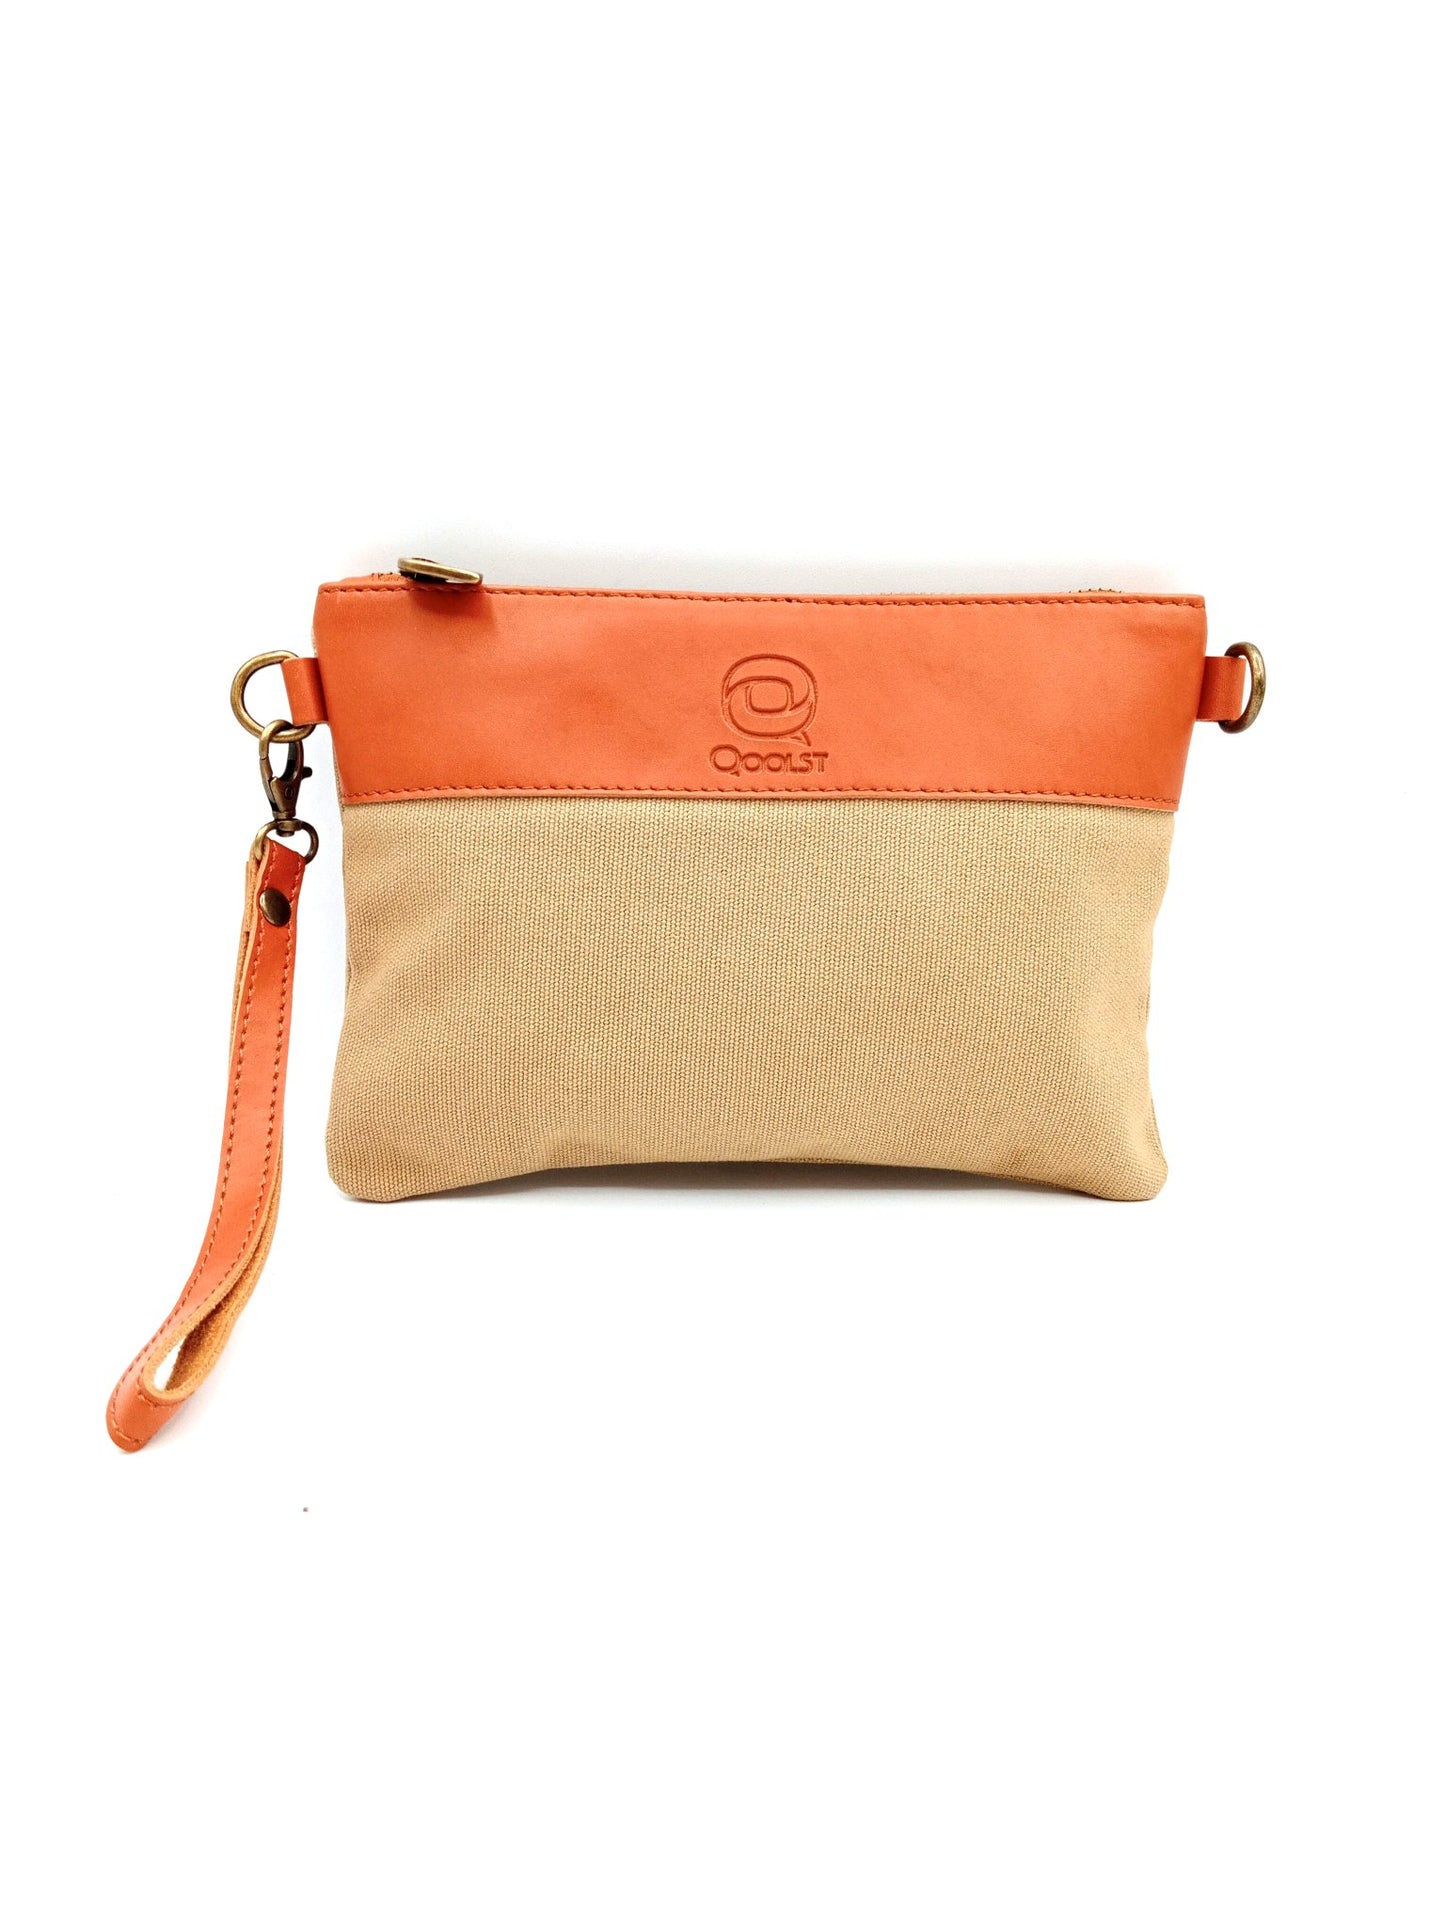 Qoolst Mini Candy cotton and regenerated leather unisex women's and men's bag